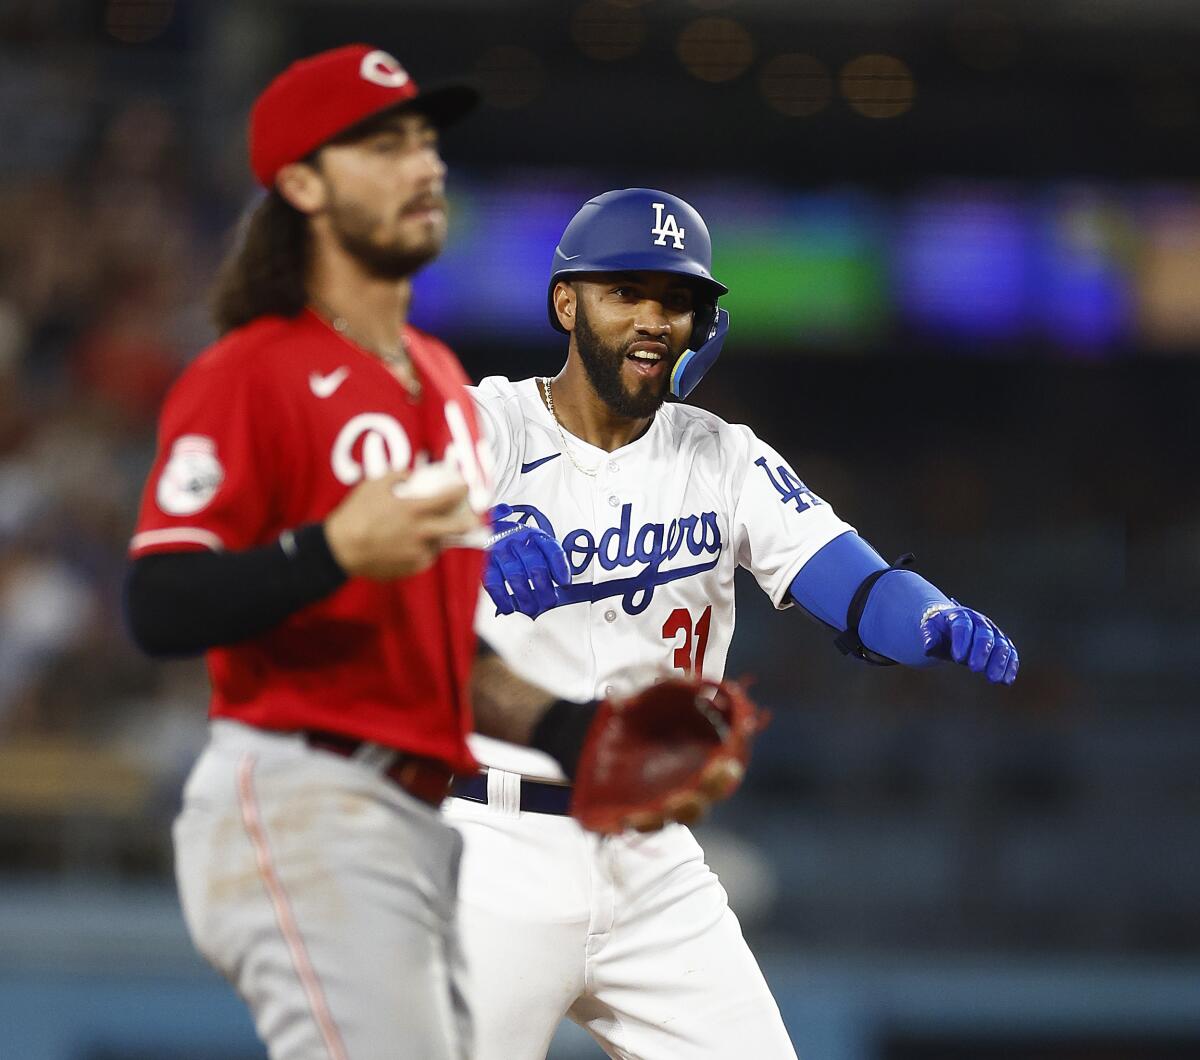 Amed Rosario smiles after hitting a double during the fourth inning of his Dodgers debut Friday.